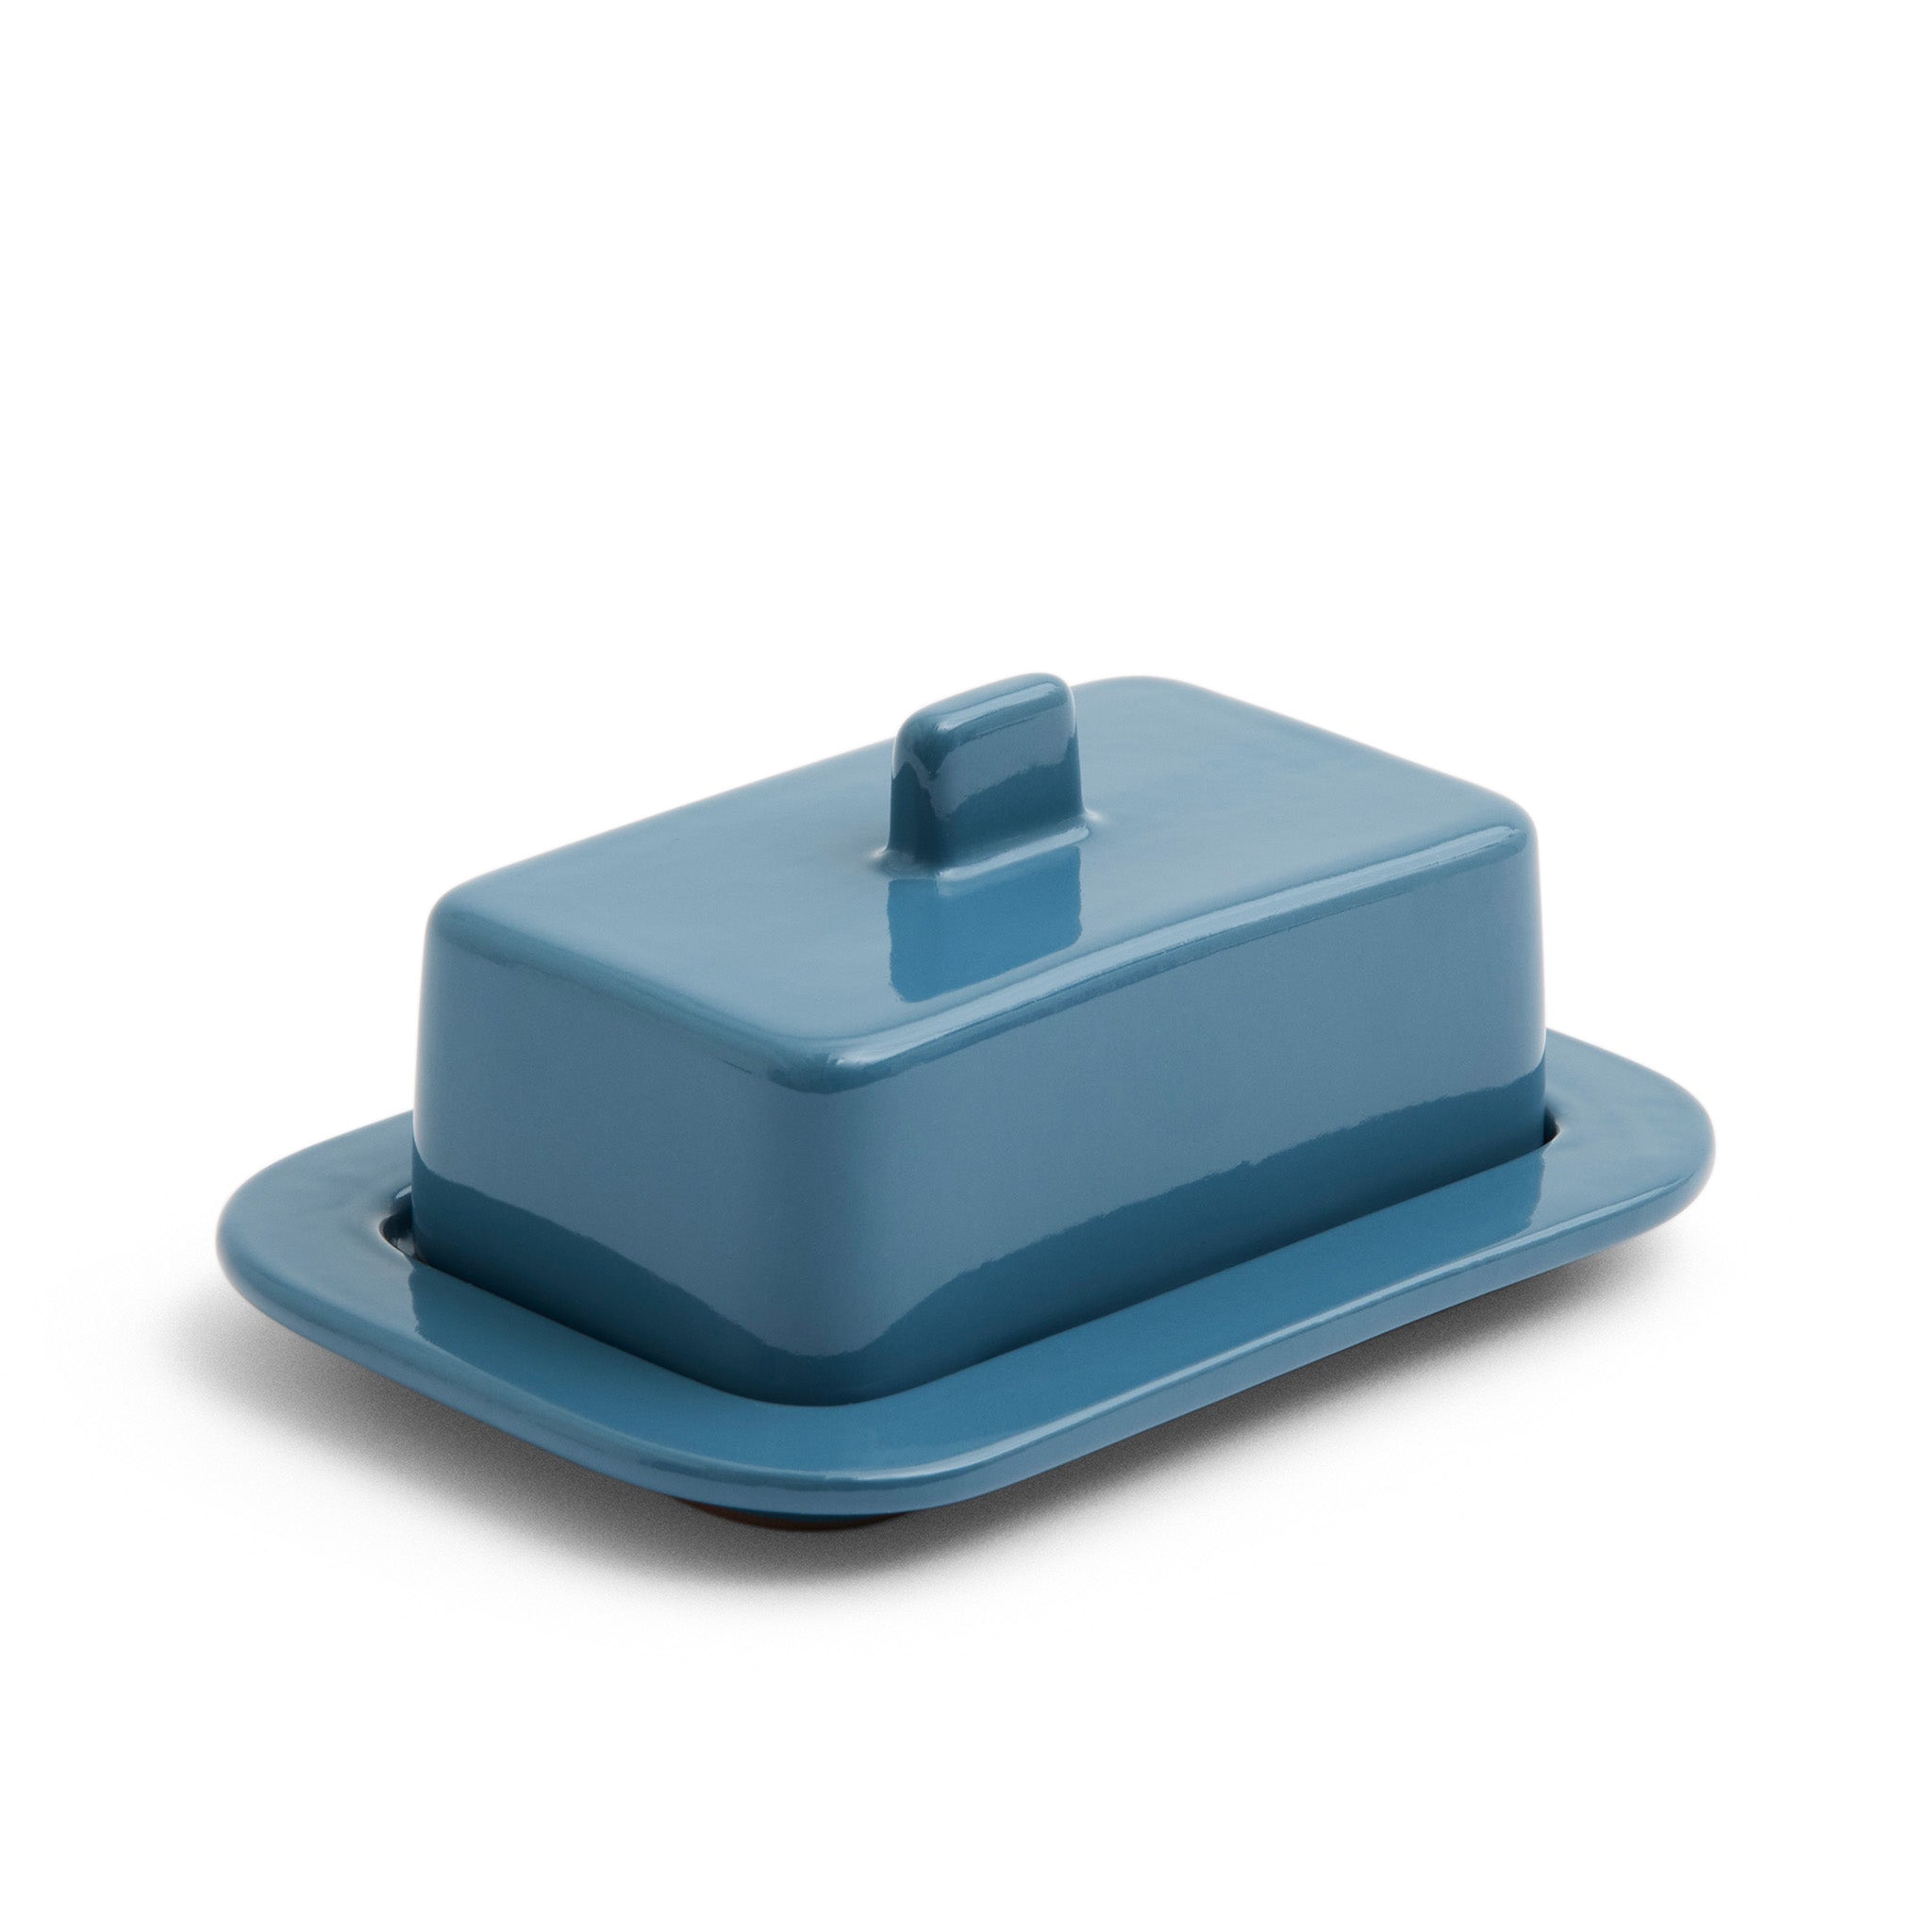 Barro Butter Dish by Pereira Office for HAY